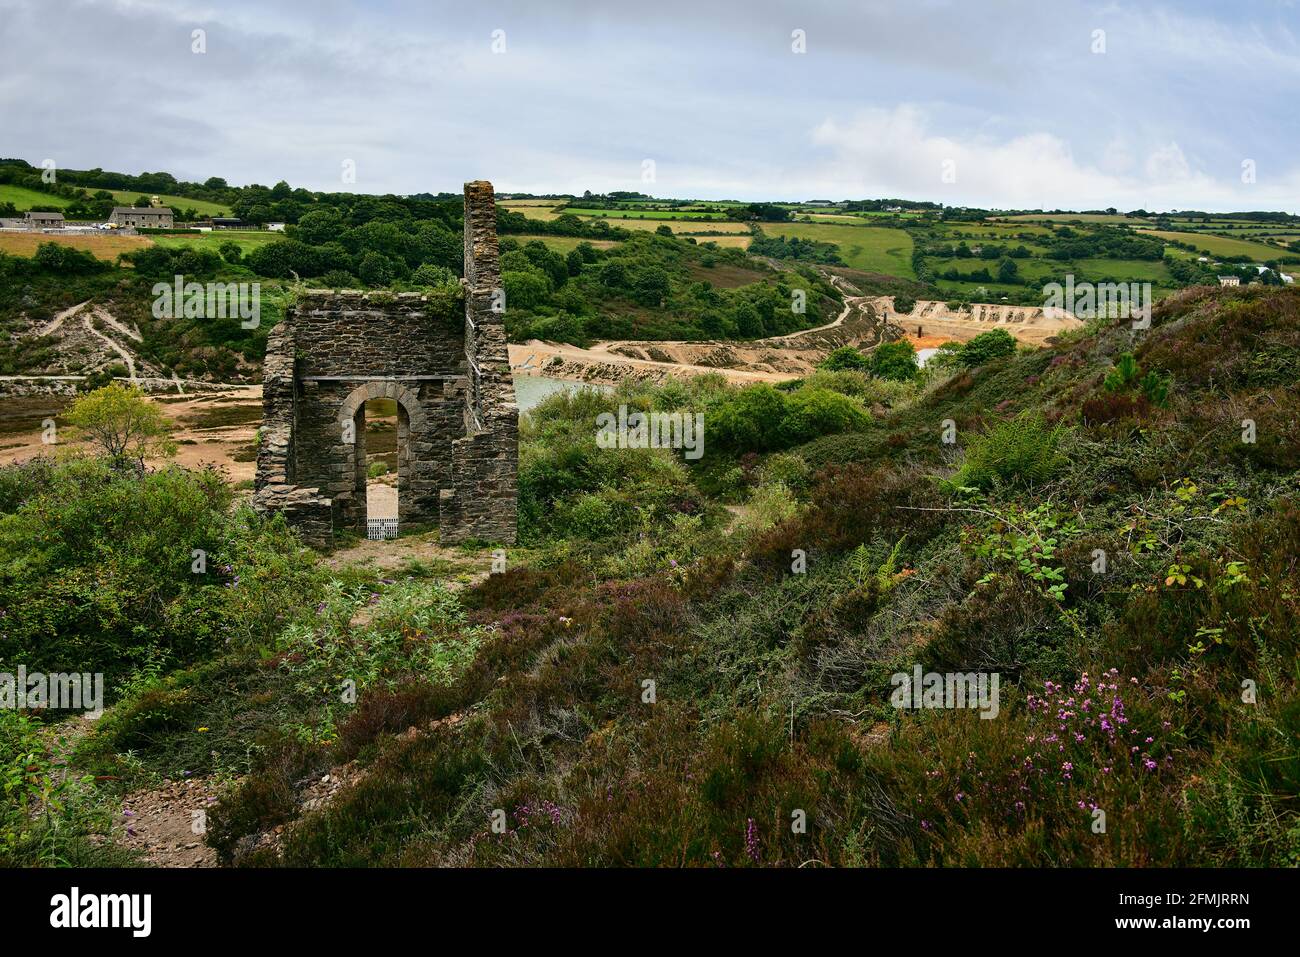 Taylor's Engine House, built in 1826, with Wheal Maid tailings lagoons below. Relics of the Cornish copper mining industry. Near St. Day, Cornwall. Stock Photo